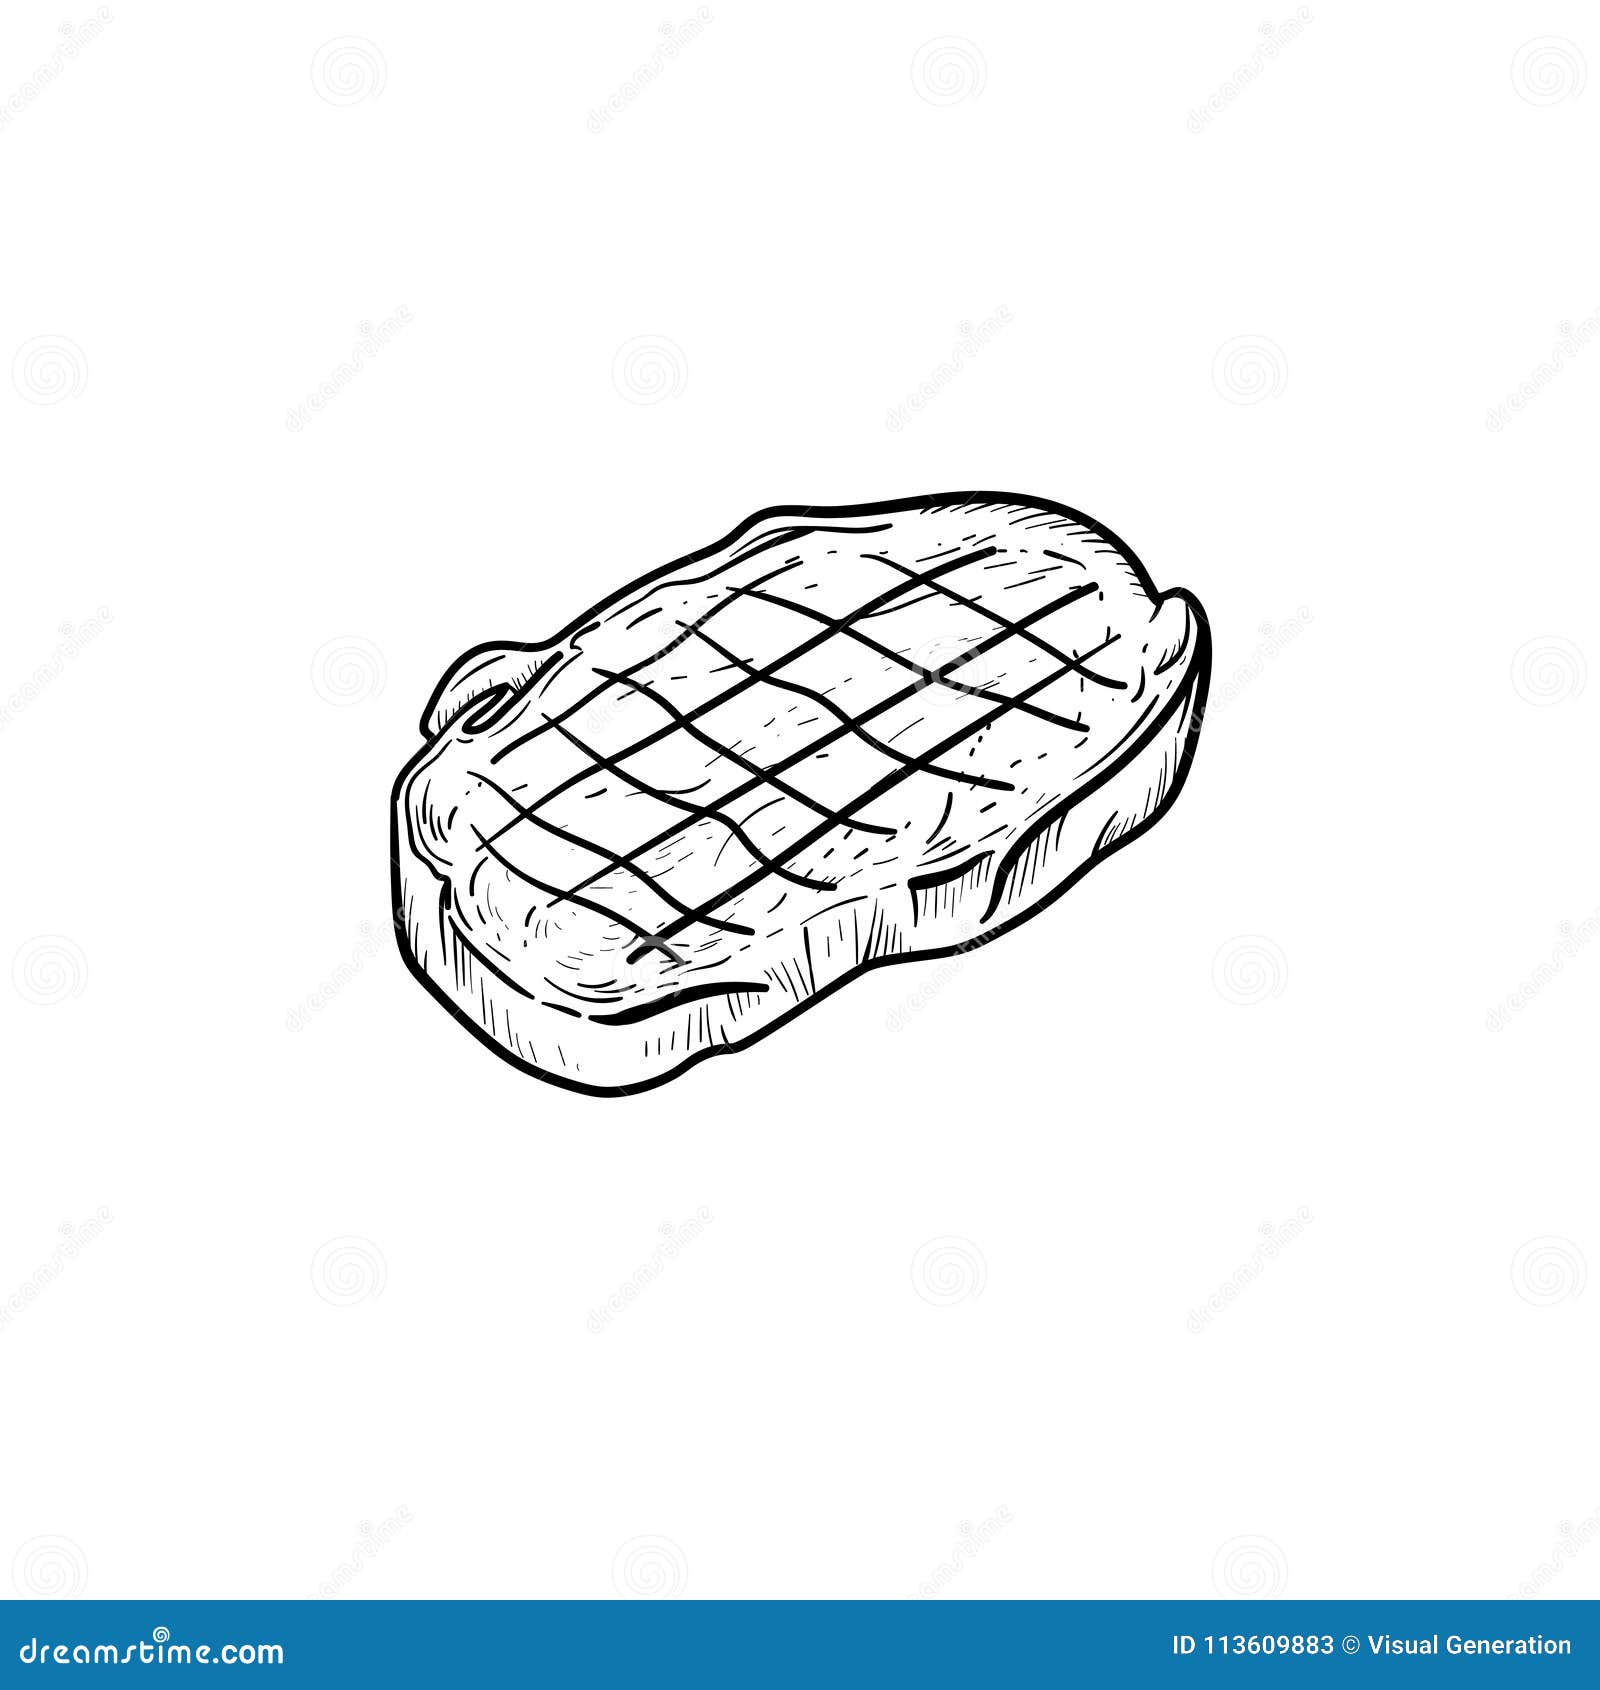 Sketch Hand Drawn Grilled Meat Steak With Sauce And Rosemary Vector Stock  Illustration - Download Image Now - iStock